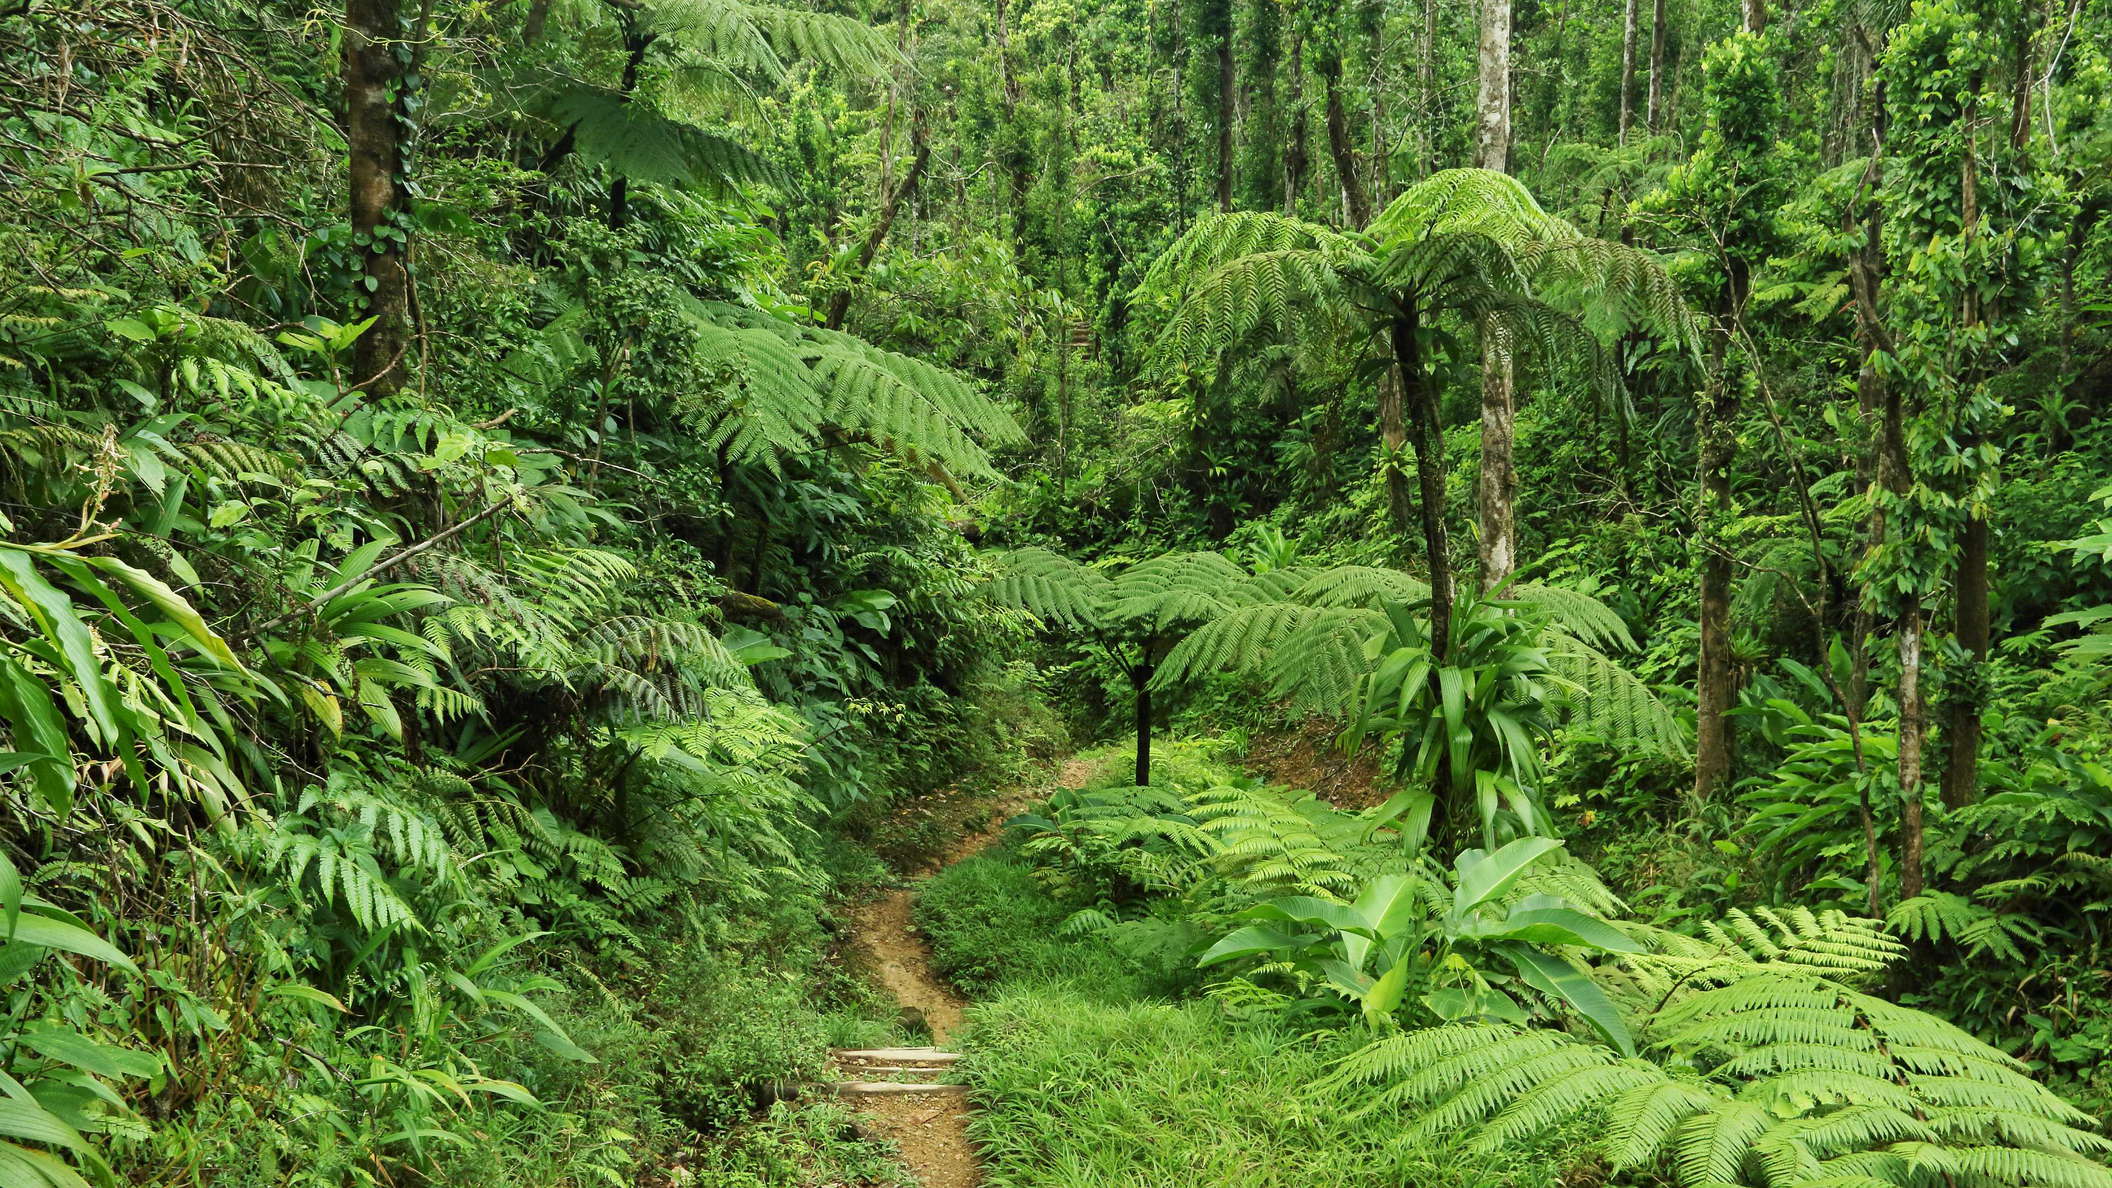 Morne Trois Pitons NP | Ravine with tree ferns